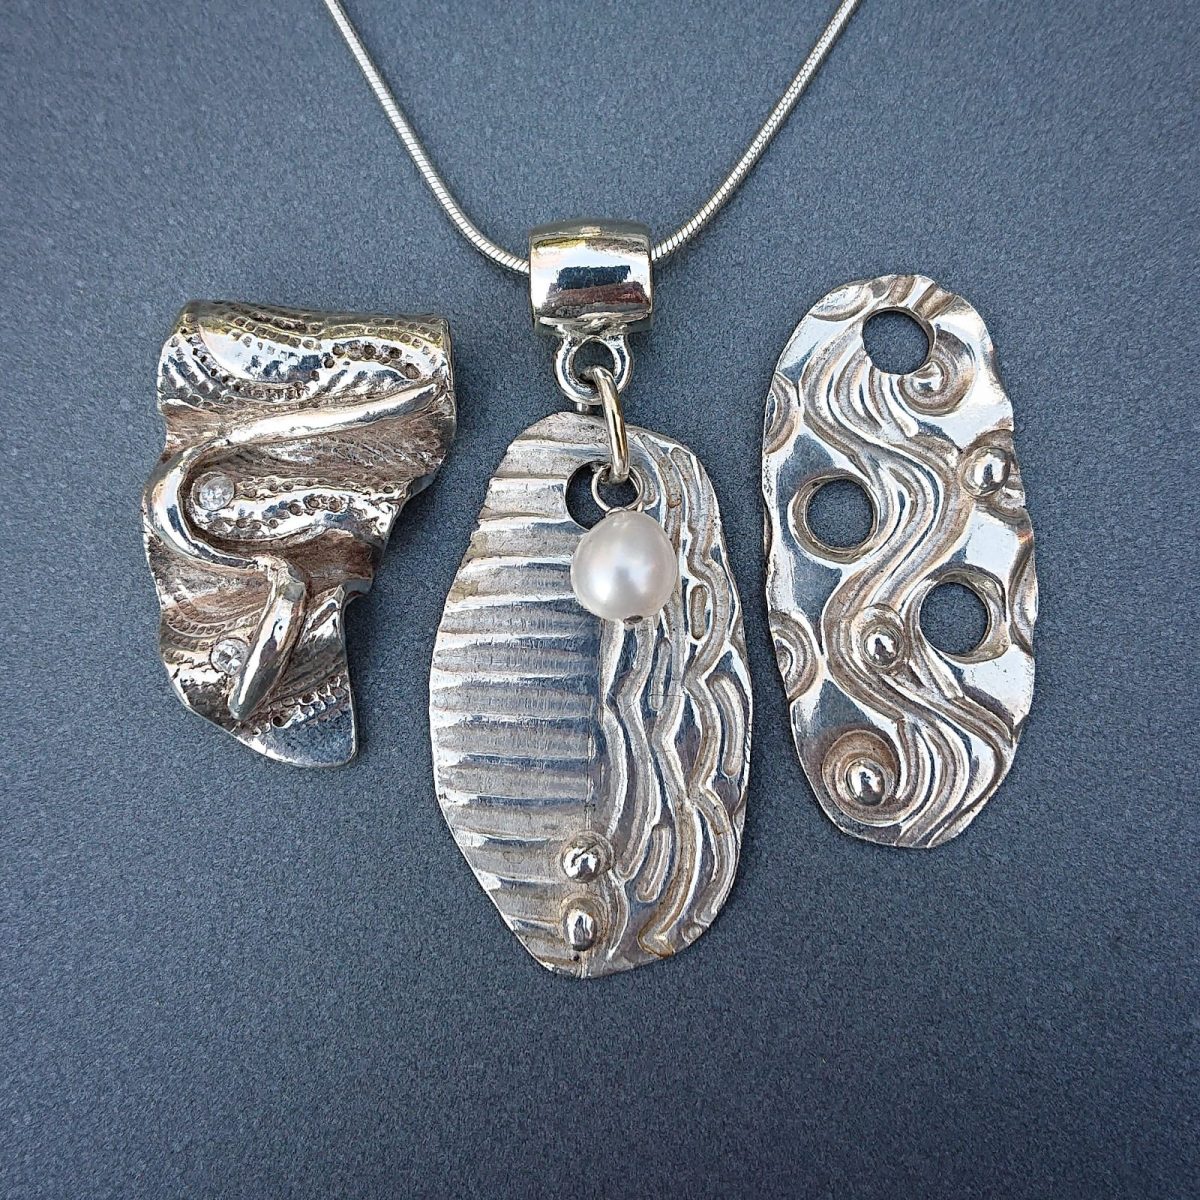 Silver Clay Made, Silver Clay Sterling, Handmade Silver Clay